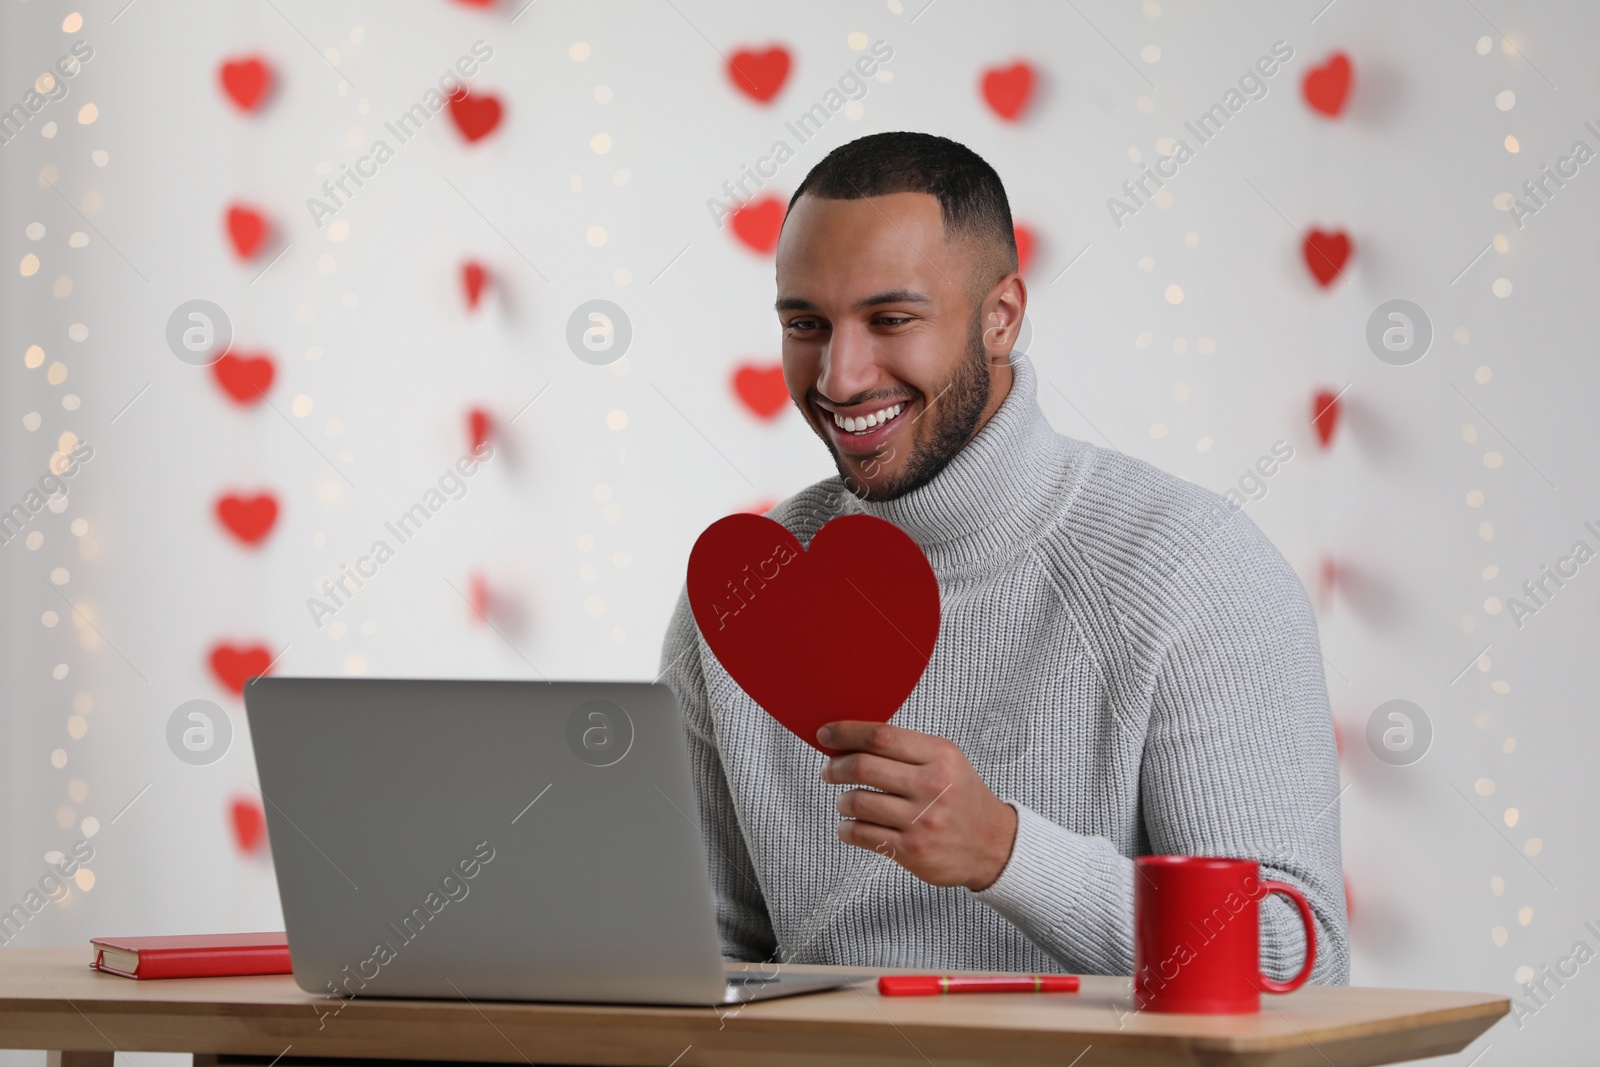 Photo of Valentine's day celebration in long distance relationship. Man holding red paper heart while having video chat with his girlfriend via laptop indoors